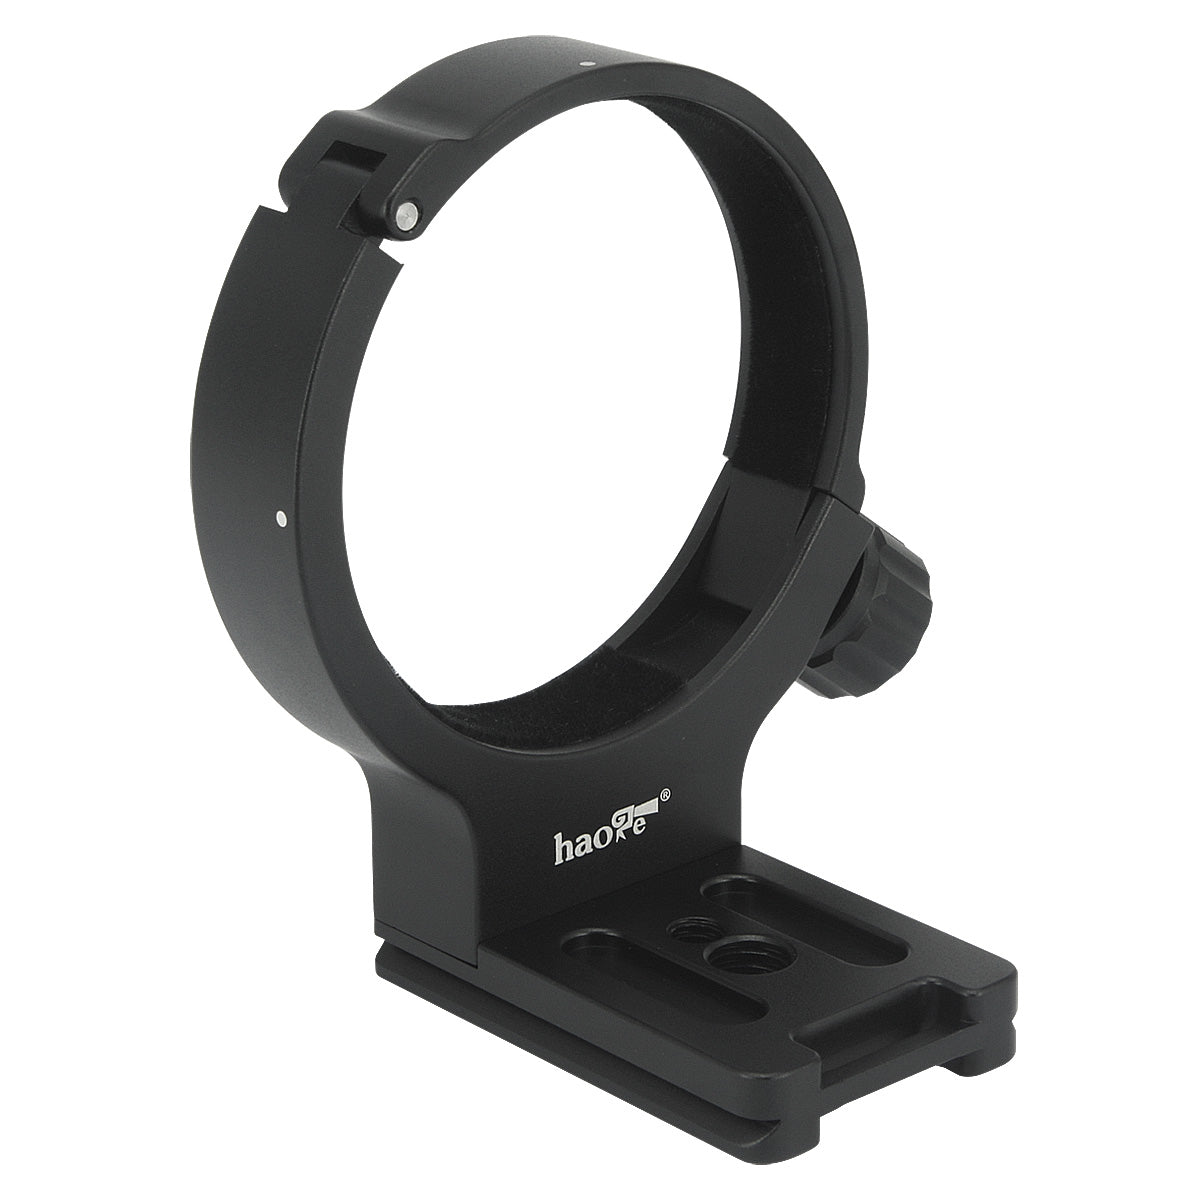 Haoge LMR-C100 Lens Collar Replacement Foot Tripod Mount Ring D for Canon EF 100mm f/2.8L Macro IS USM Lens Built-in Arca Type Quick Release Plate